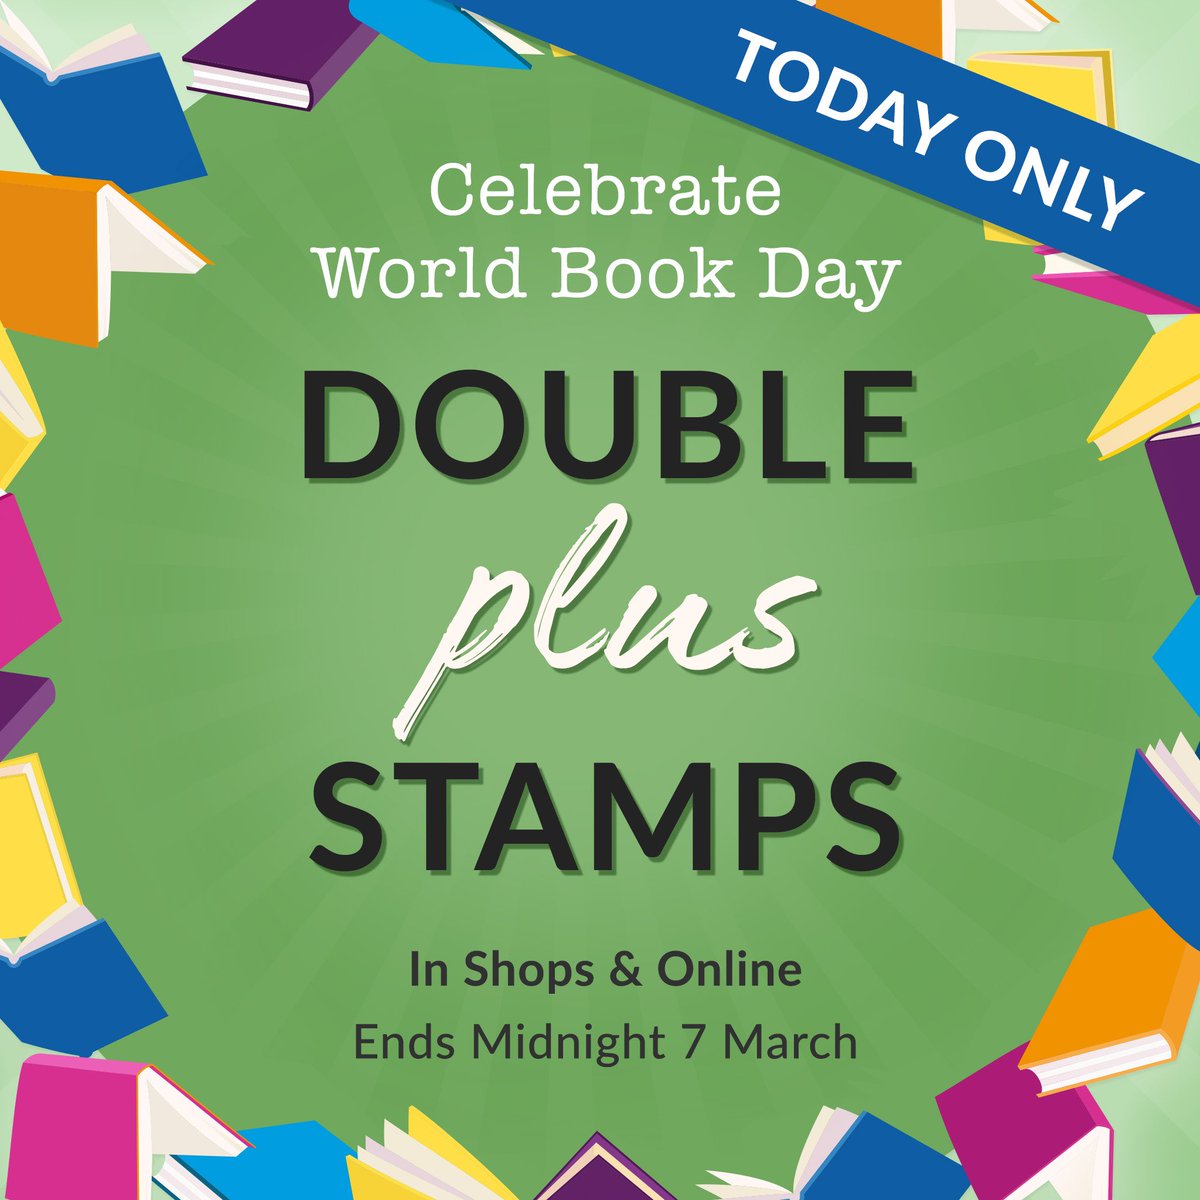 Celebrate #WorldBookDay with us with DOUBLE STAMPS all day! In-store and online, ending at midnight tonight. Don't miss out!